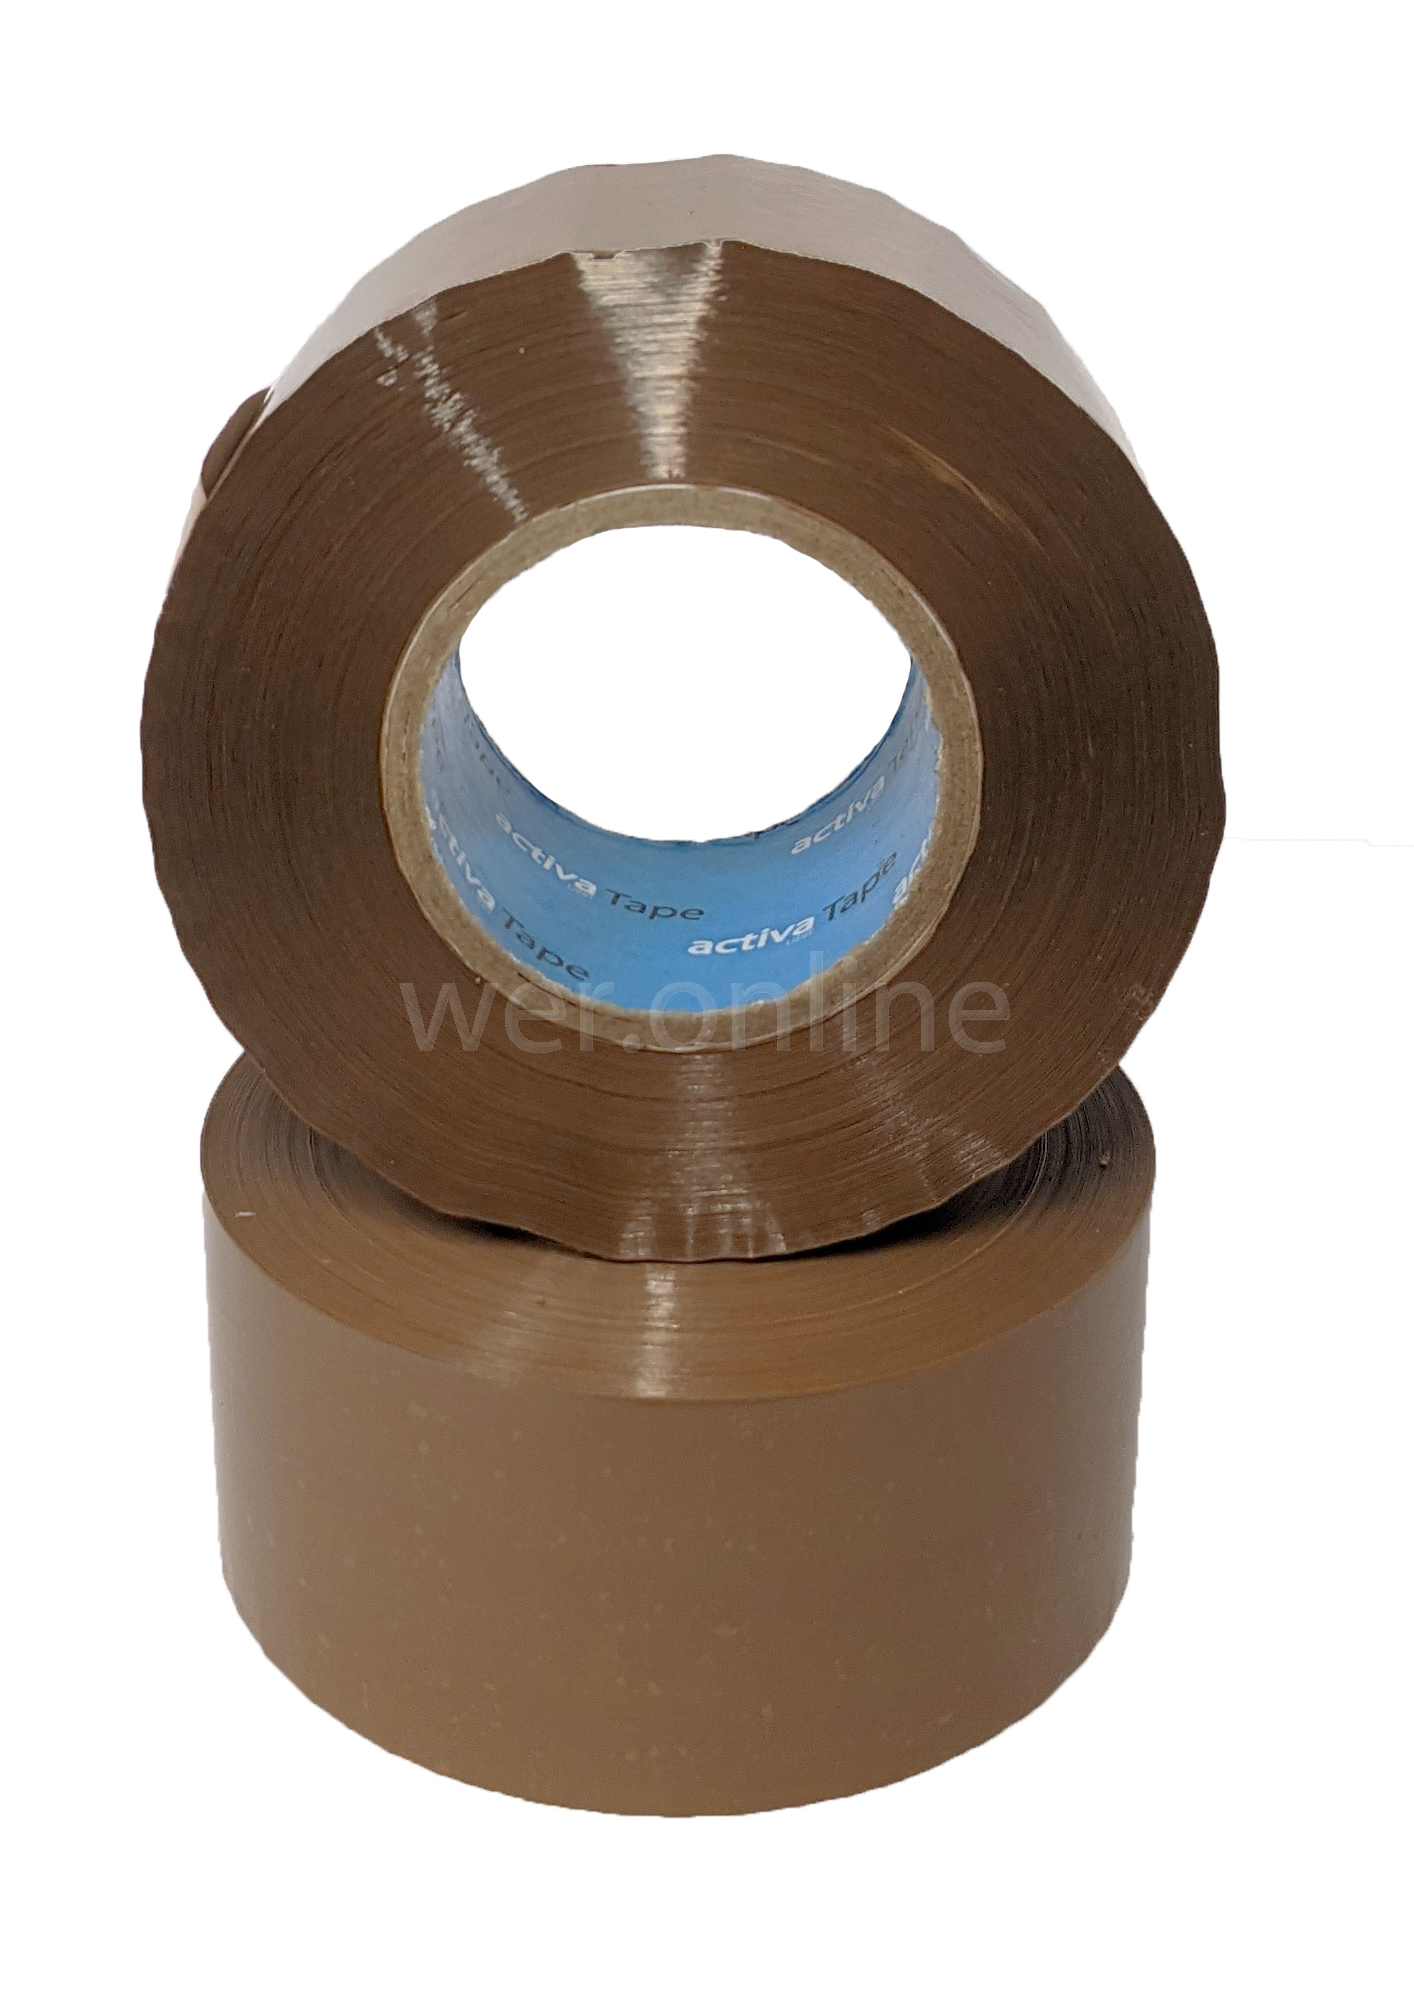 Big Tape Fragile Packaging Parcel Packing Tape Low Noise Extra Long 48mm x 150m 